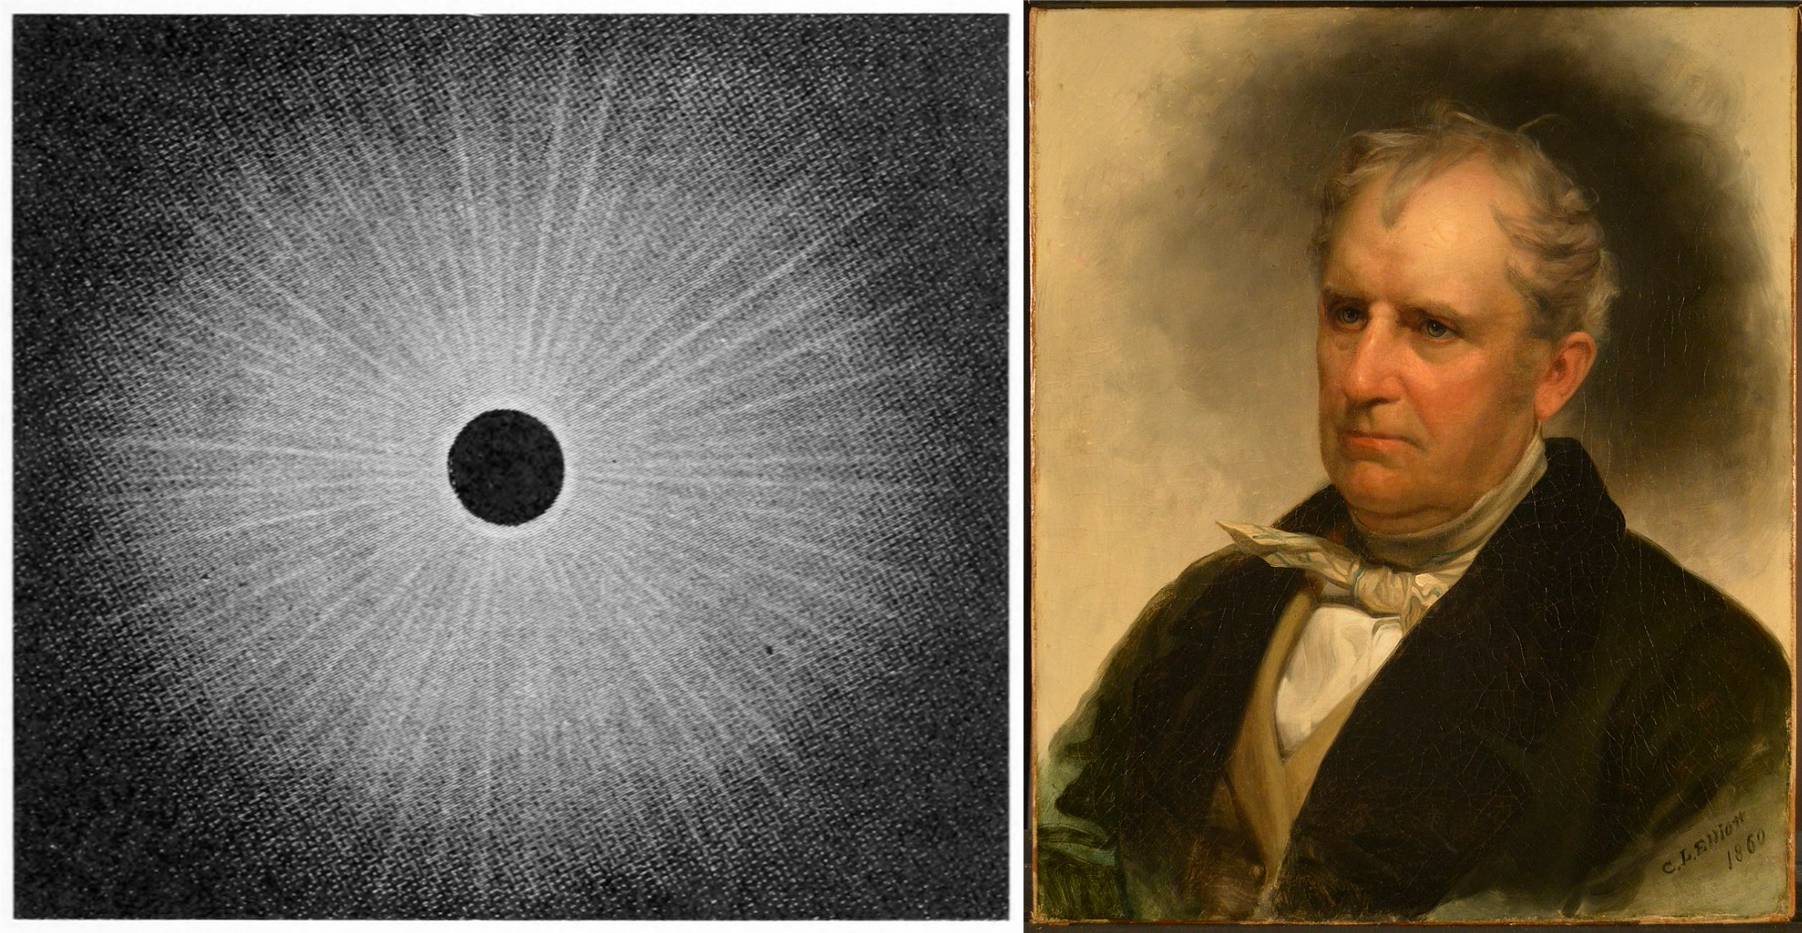 Illustration of the Sun's corona as seen during the Solar eclipse of June 16, 1806 (left).Portrait of James Fenimore Cooper, 1860 (right).